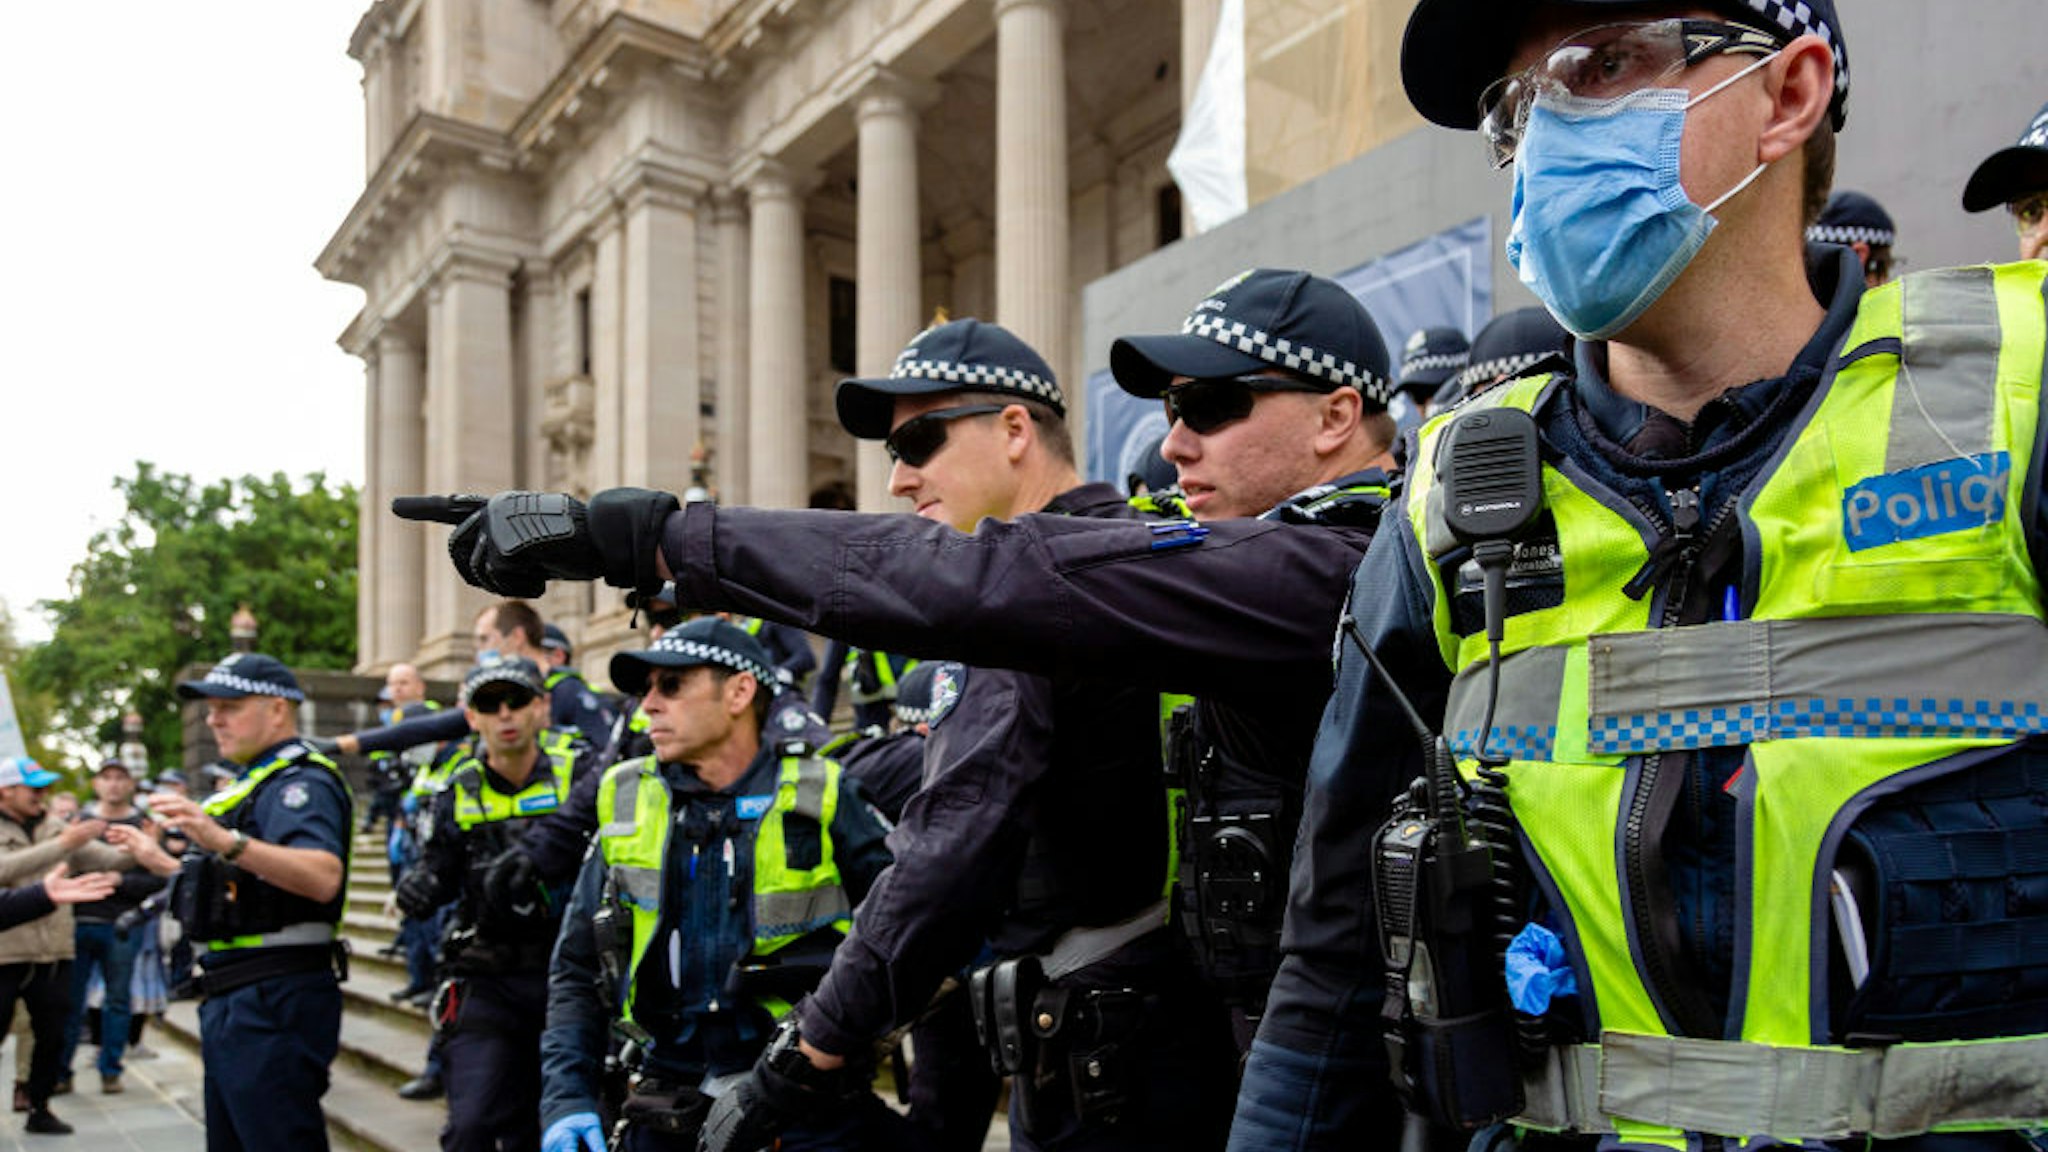 MELBOURNE, AUSTRALIA - MAY 10: Police and protesters violently clash during the Coronavirus (COVID-19) Anti-Lockdown Protest at Parliament House on 10 May, 2020 in Melbourne, Australia. (Photo by Speed Media/Icon Sportswire)